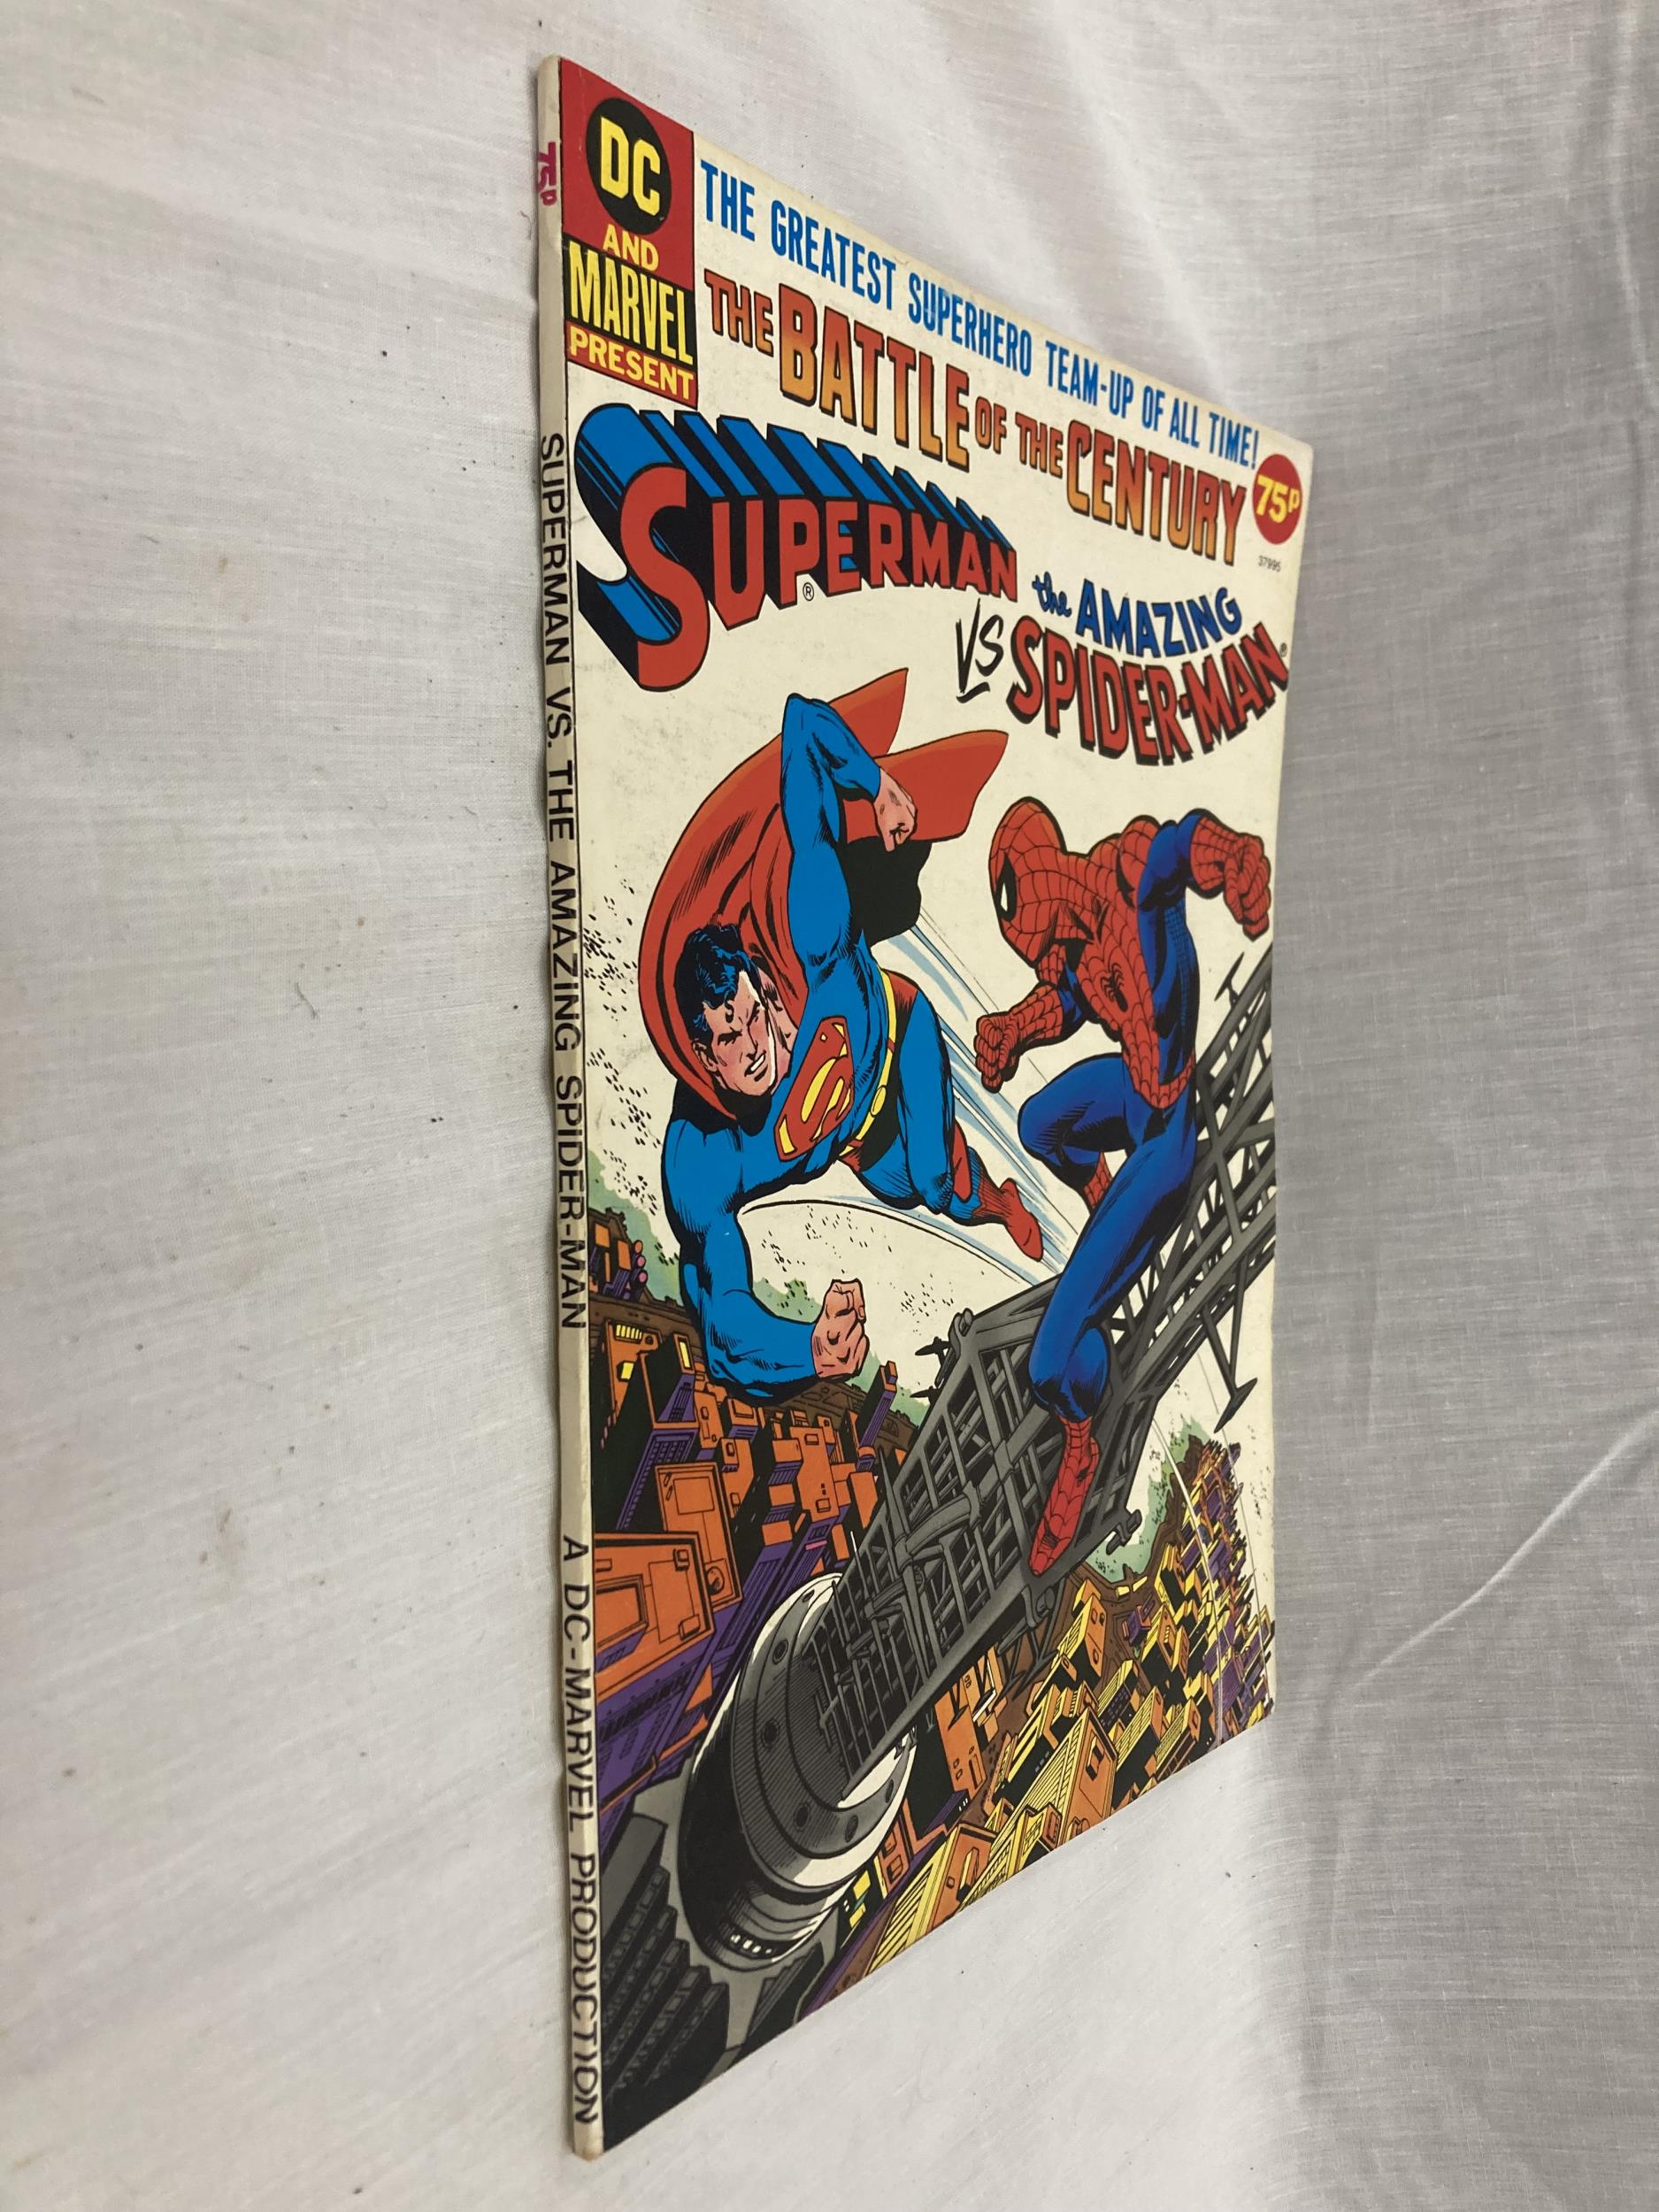 A DC AND MARVEL VINTAGE COMIC THE BATTLE OF THE CENTURY SUPERMAN V SPIDERMAN 1976 - Image 3 of 6